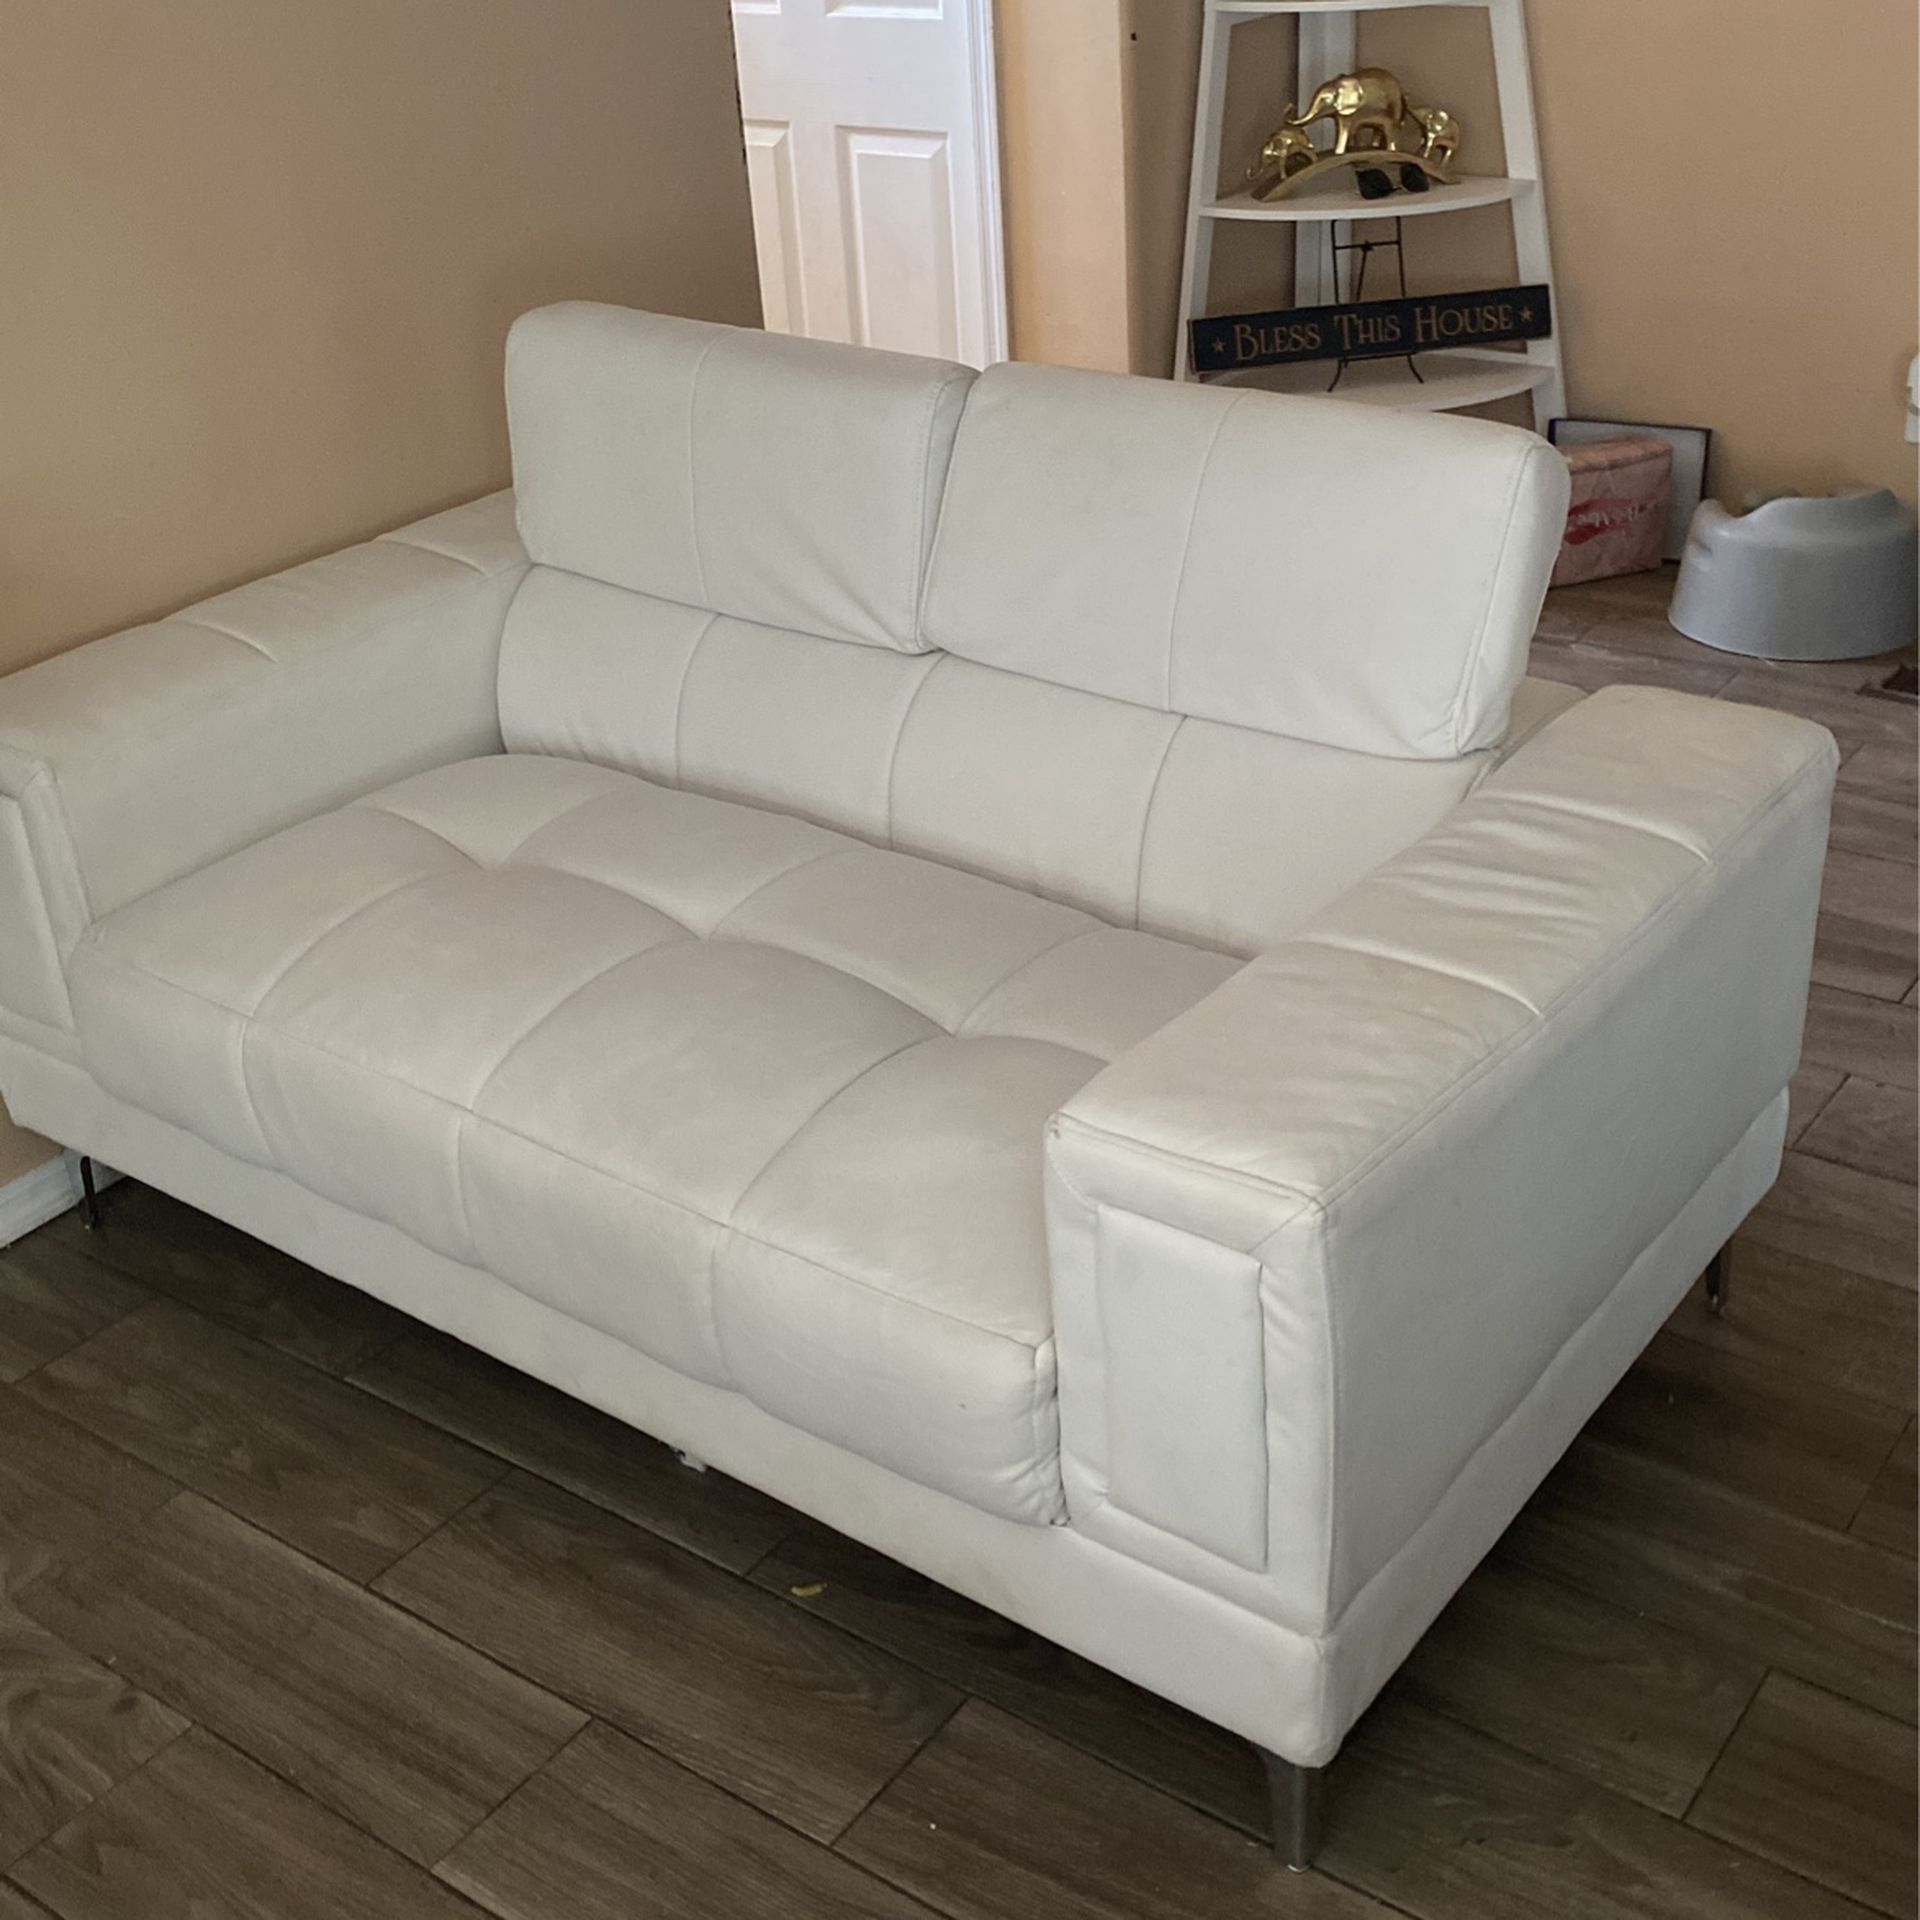 White Leather Couch And Love Seat